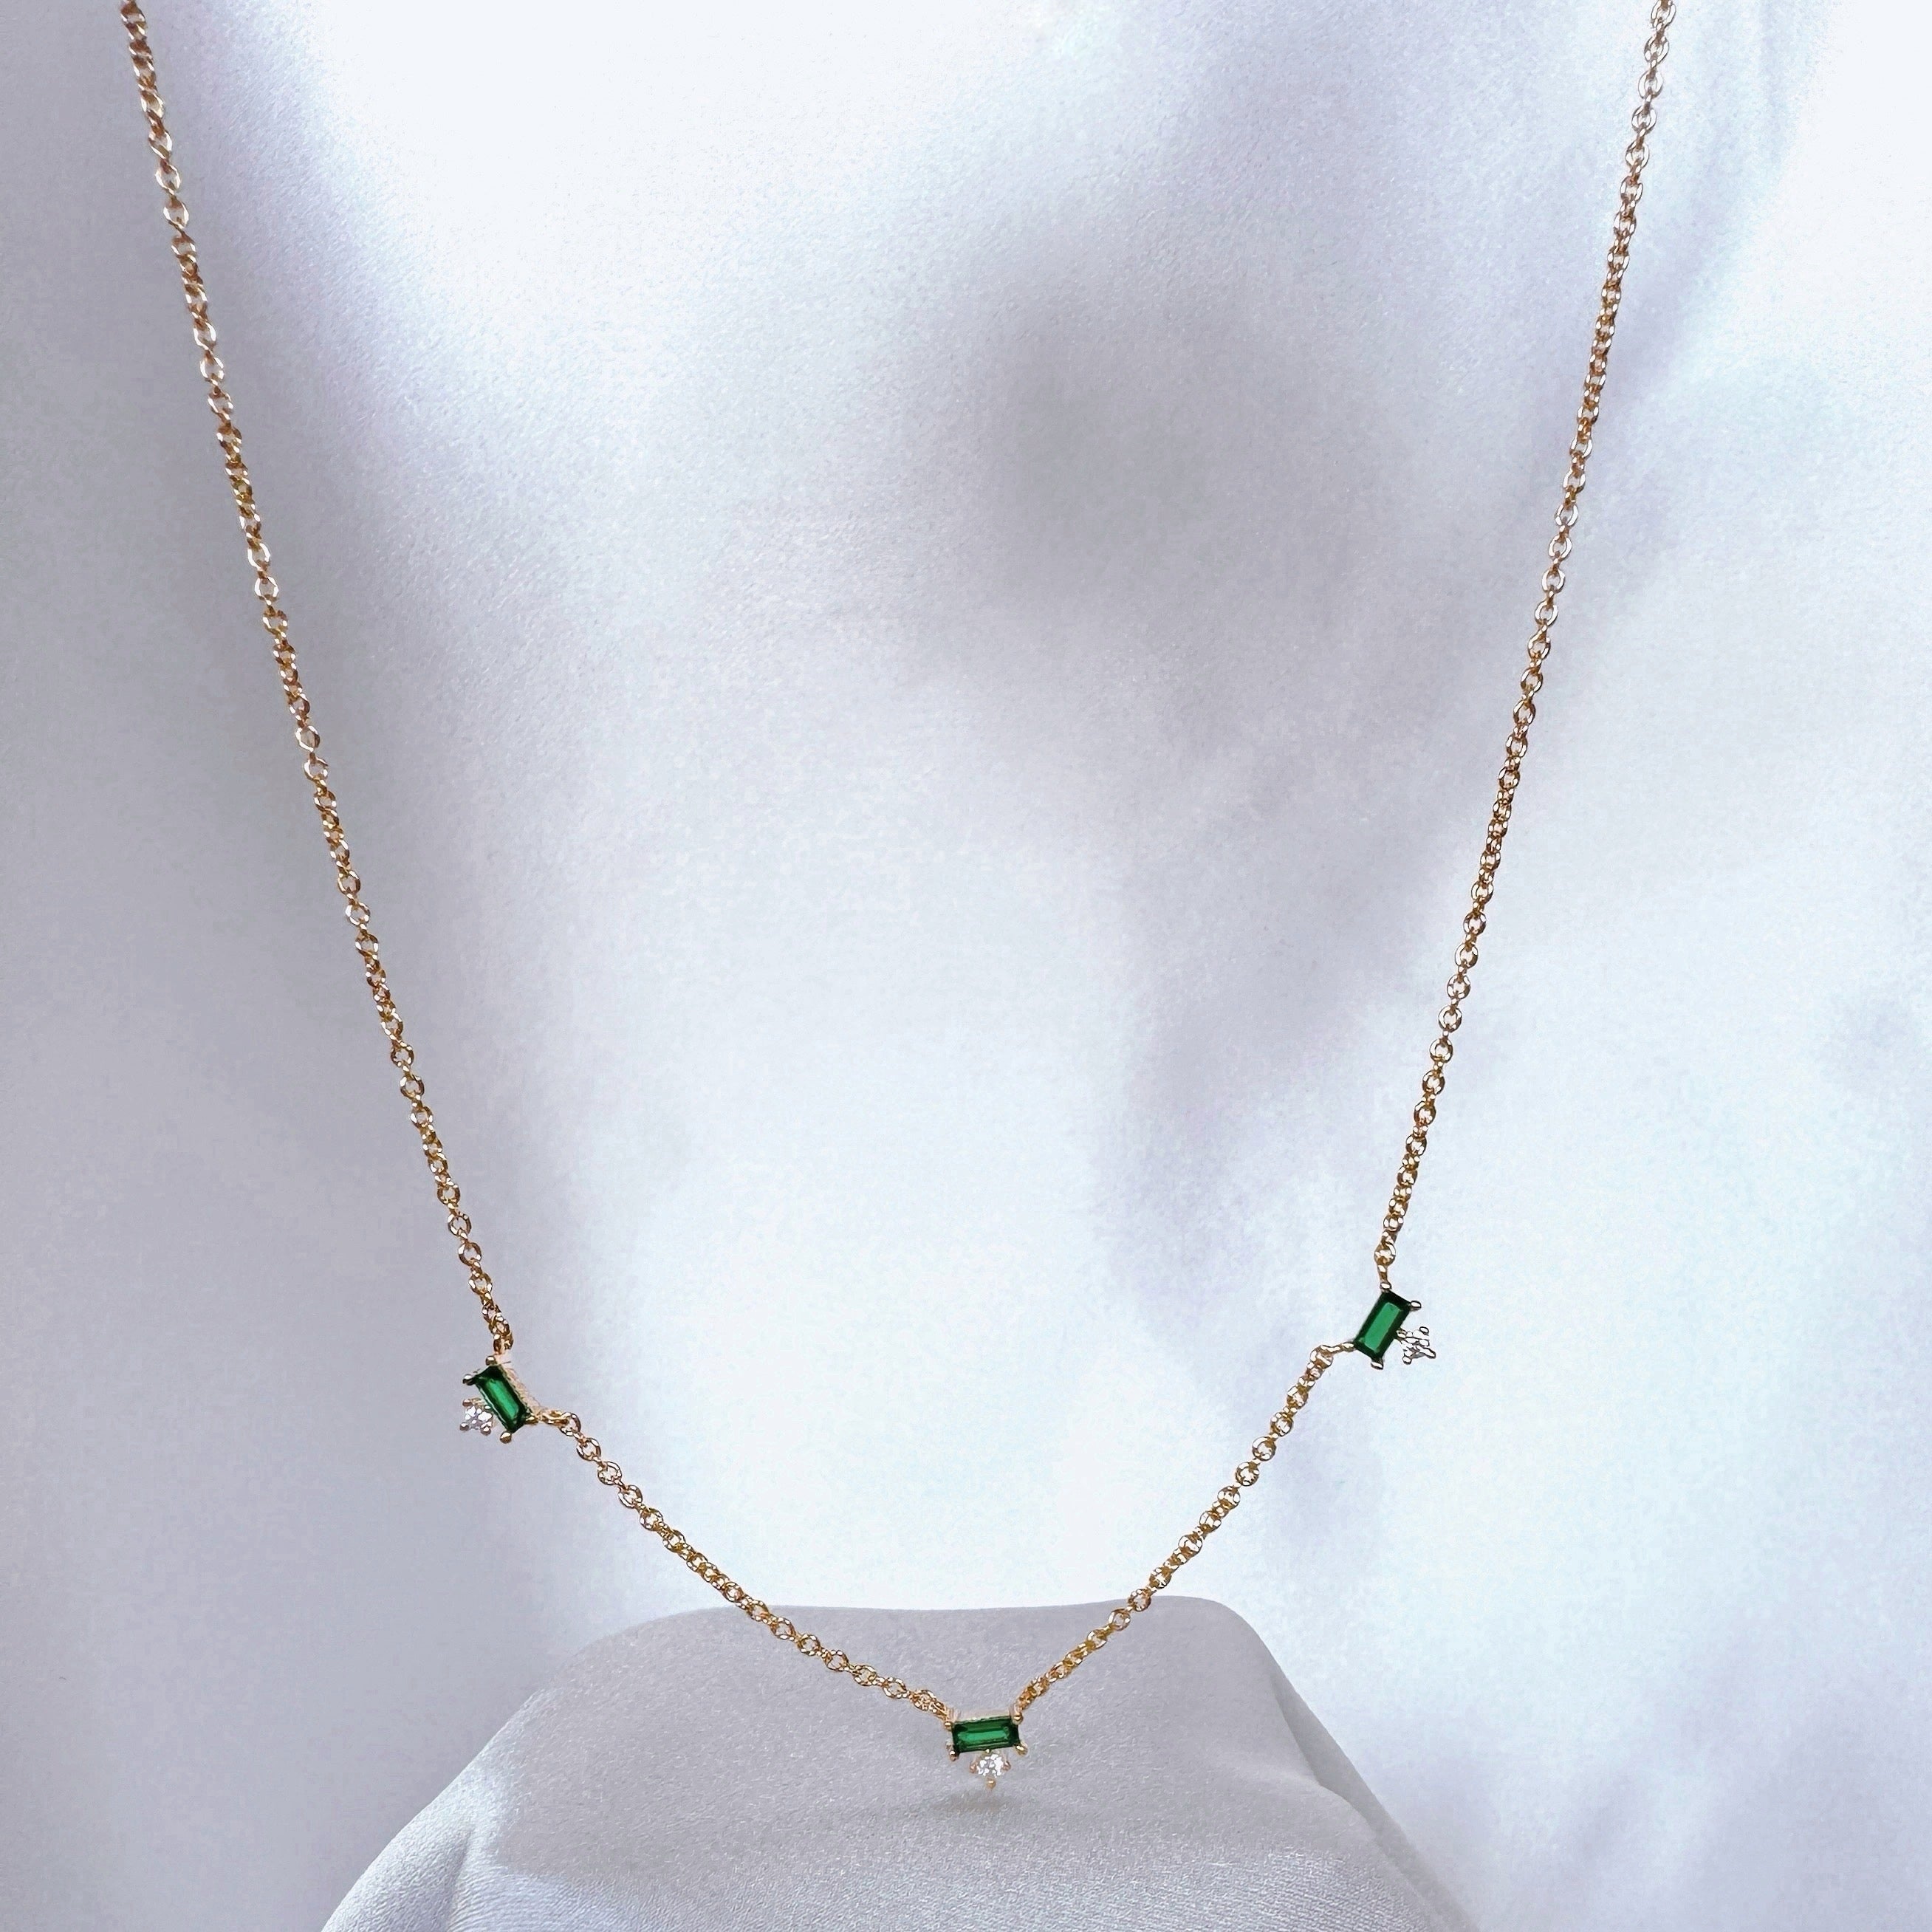 Gold-plated “Poème” necklace